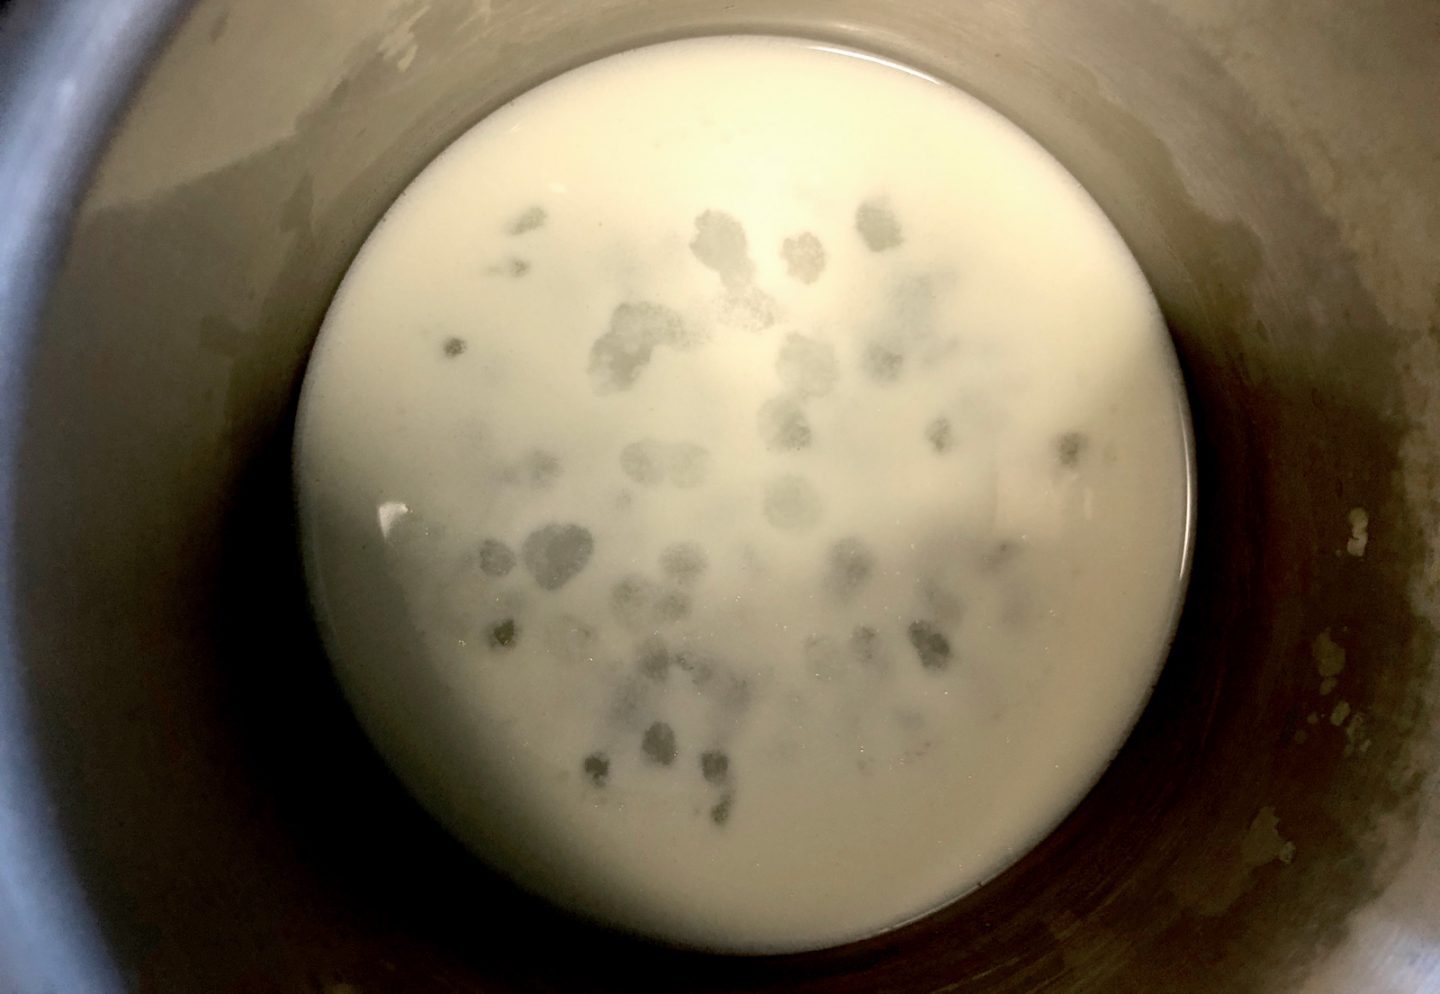 Failed attempt at extracting casein from breastmilk